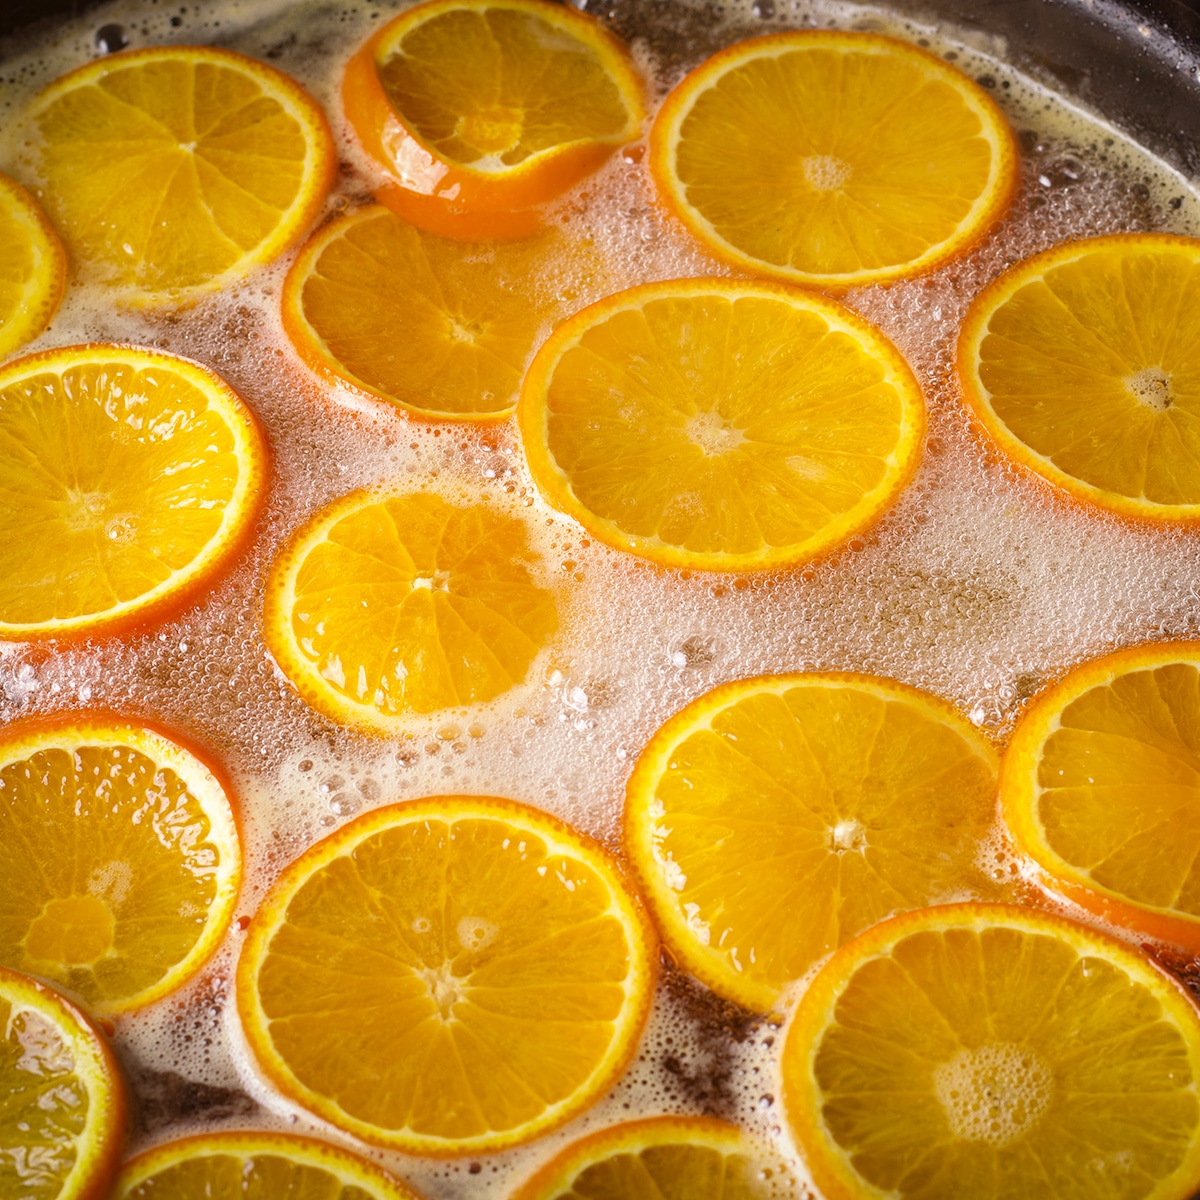 Orange slices simmering in simple syrup.